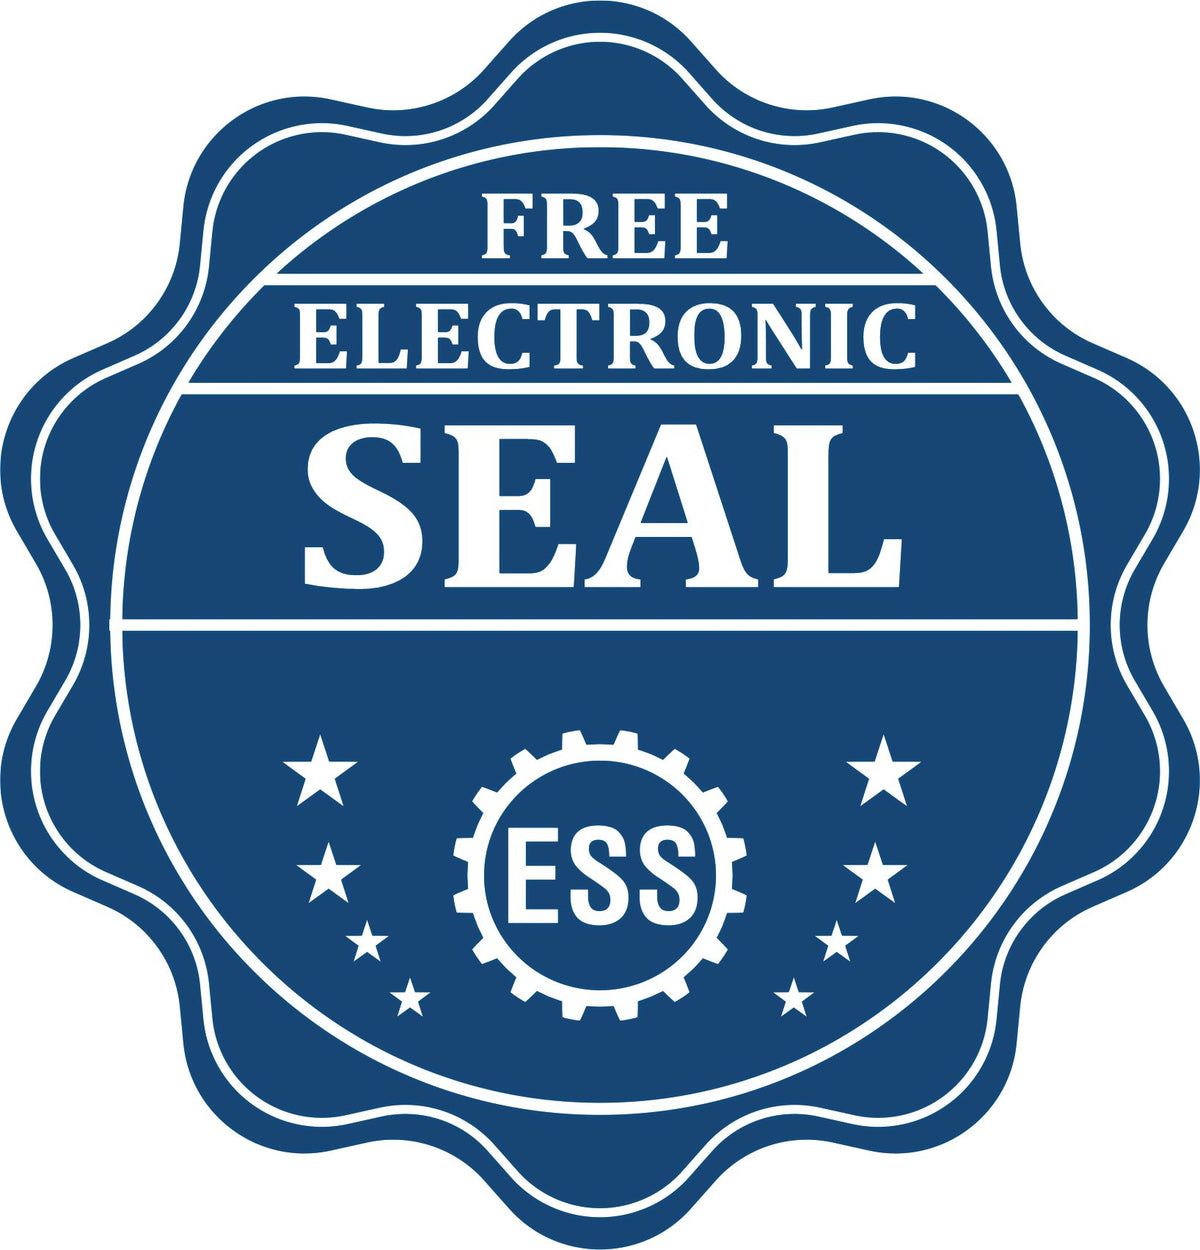 A badge showing a free electronic seal for the Gift Arkansas Land Surveyor Seal with stars and the ESS gear on the emblem.